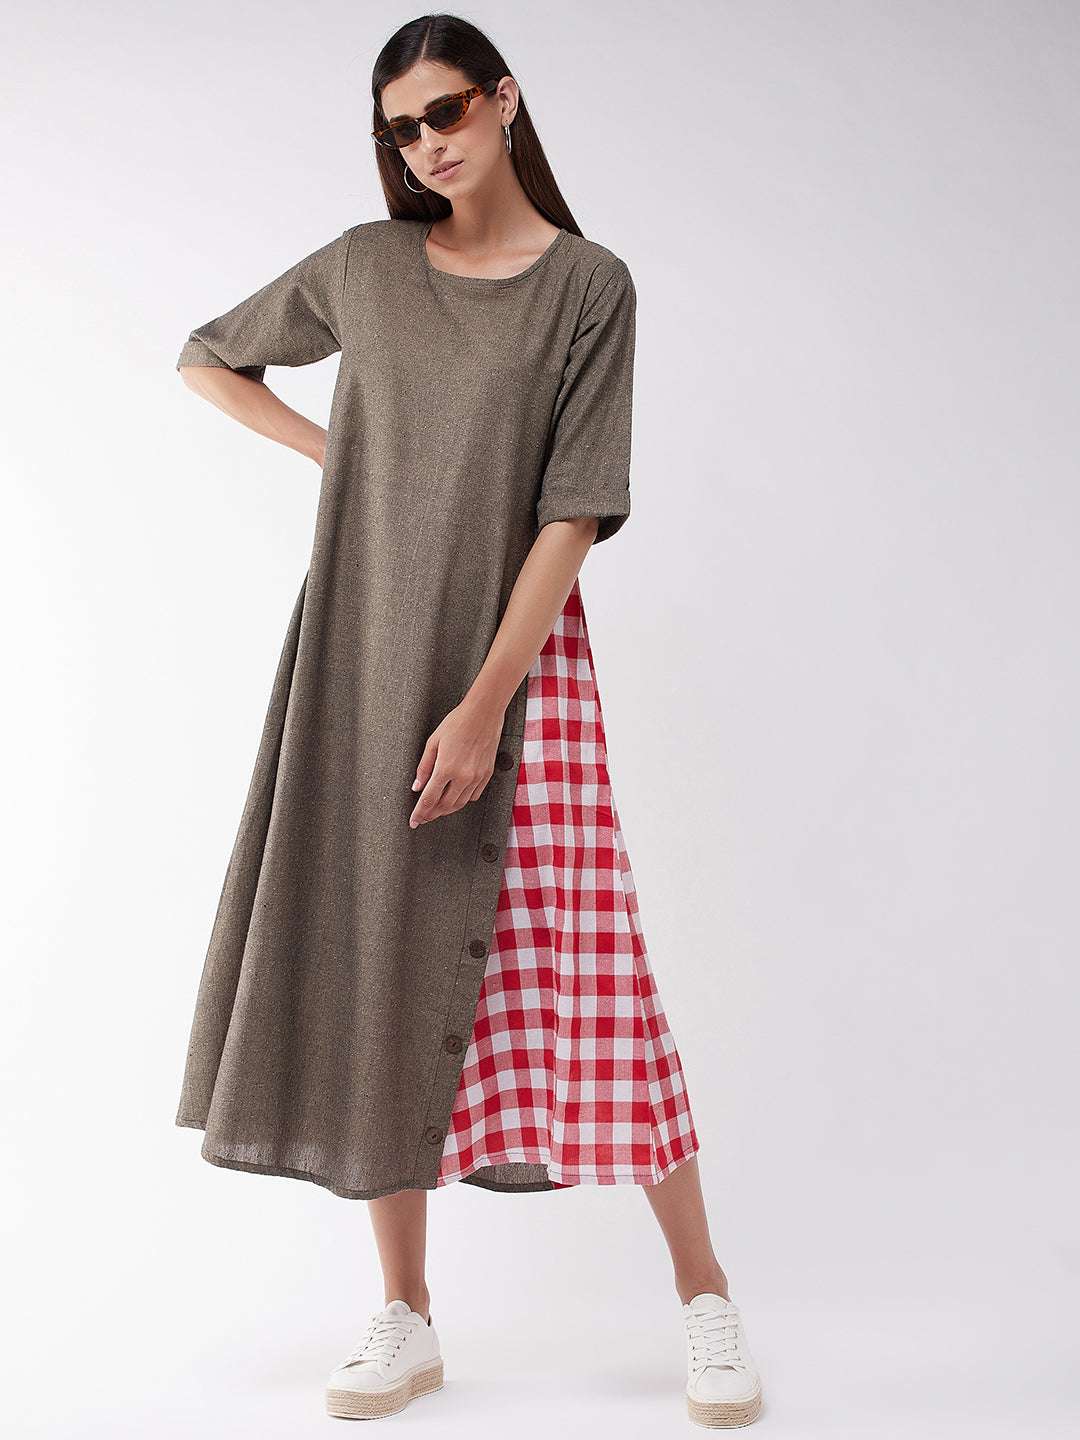 Brown Chambray Dress With Red Check Panel